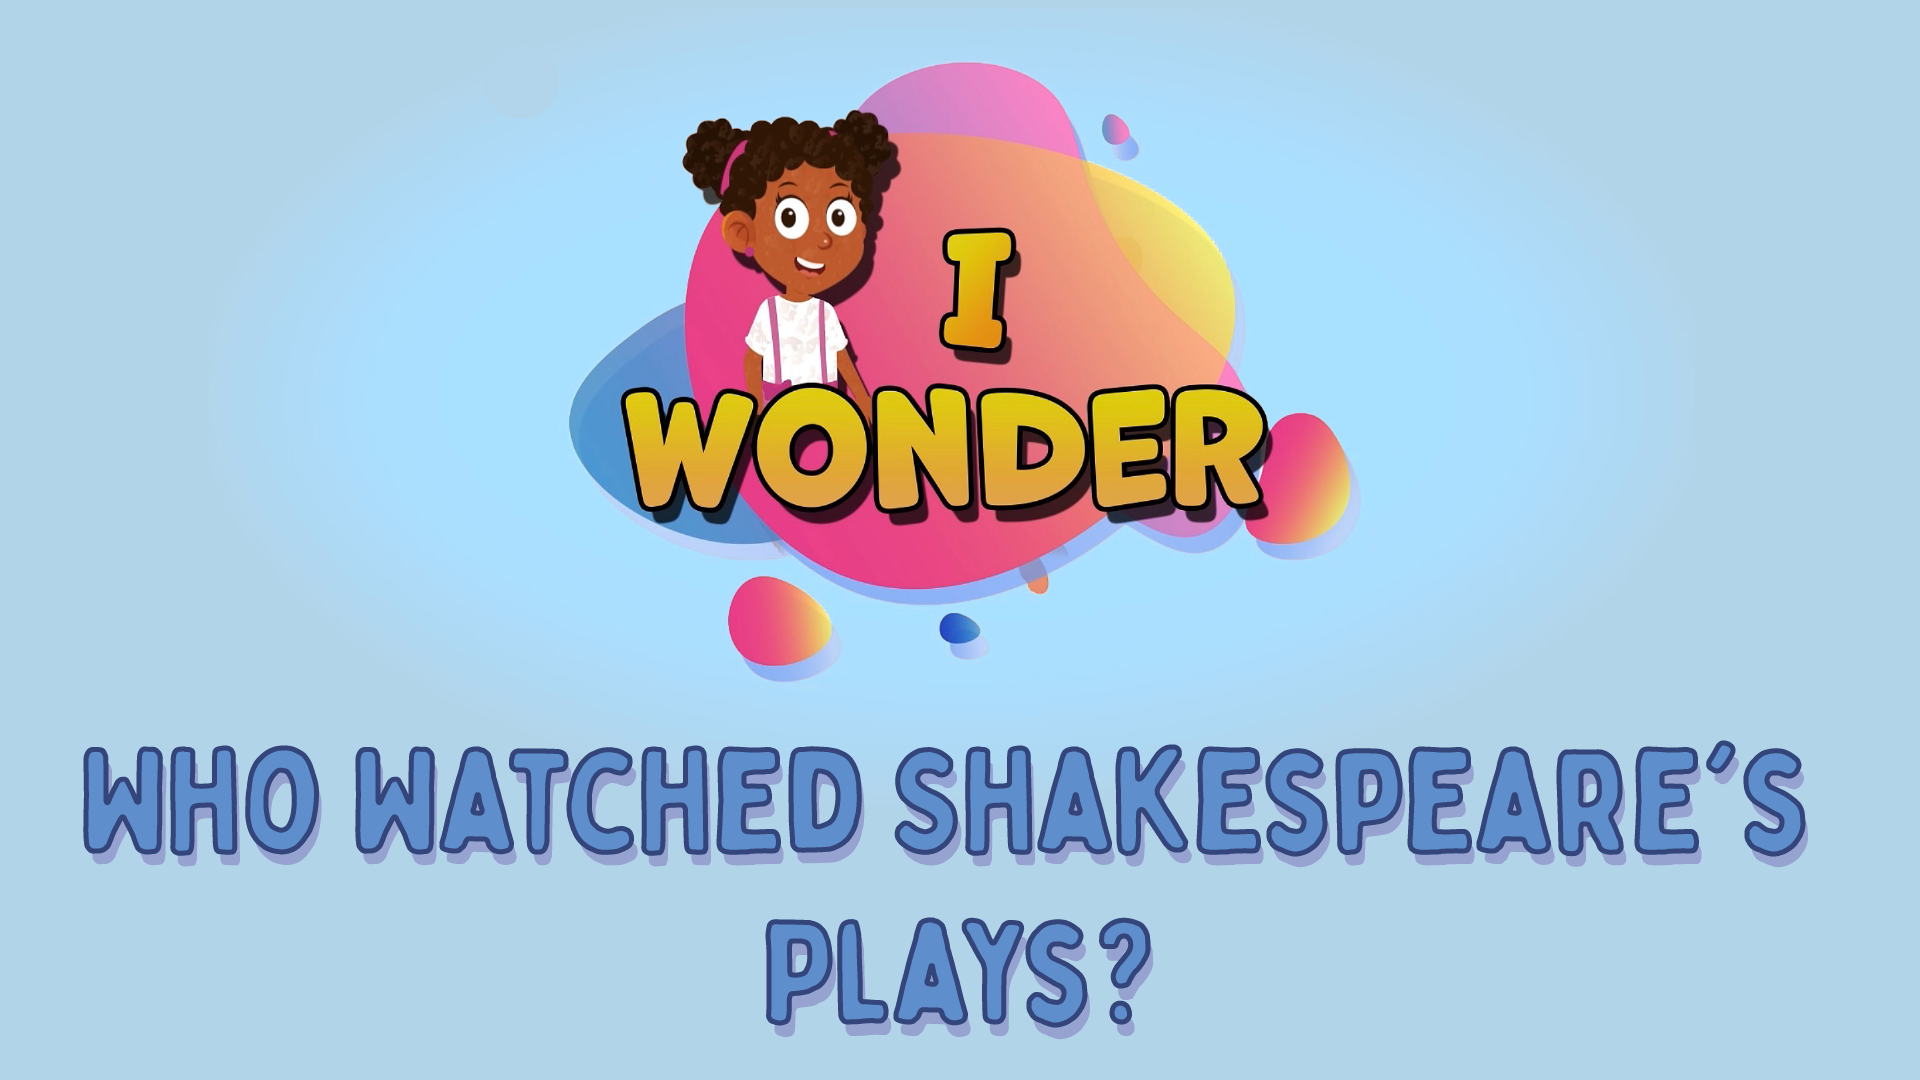 Who Watched Shakespeare’s Plays?